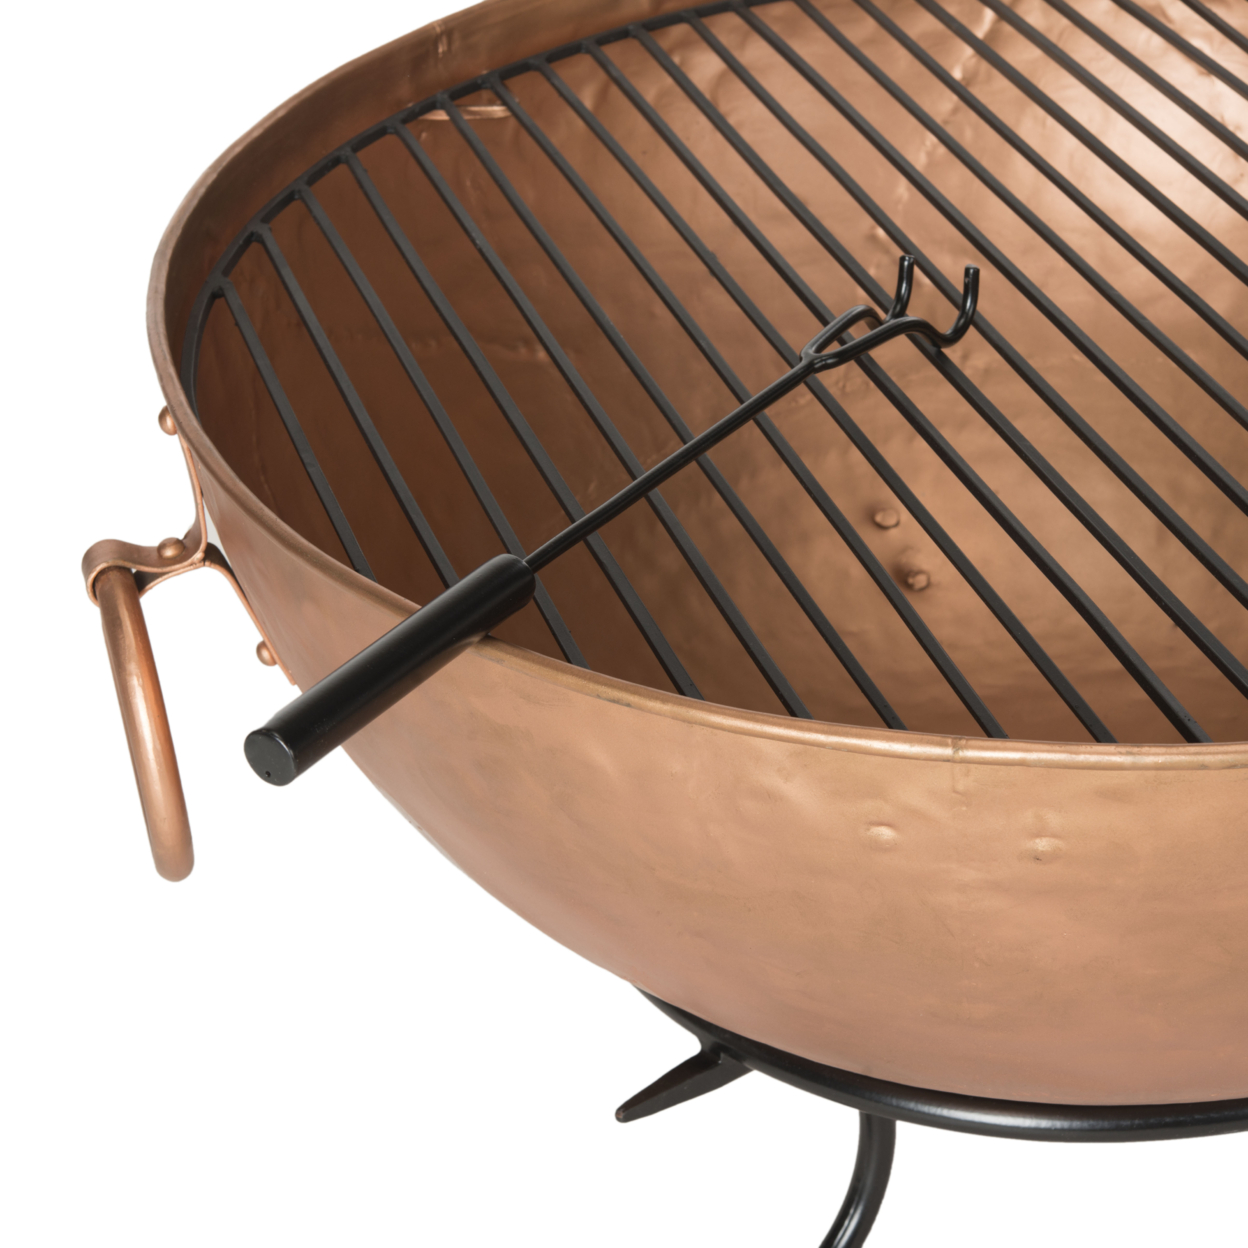 SAFAVIEH Outdoor Collection Bangkok Fire Pit Copper/Black - image 1 of 3